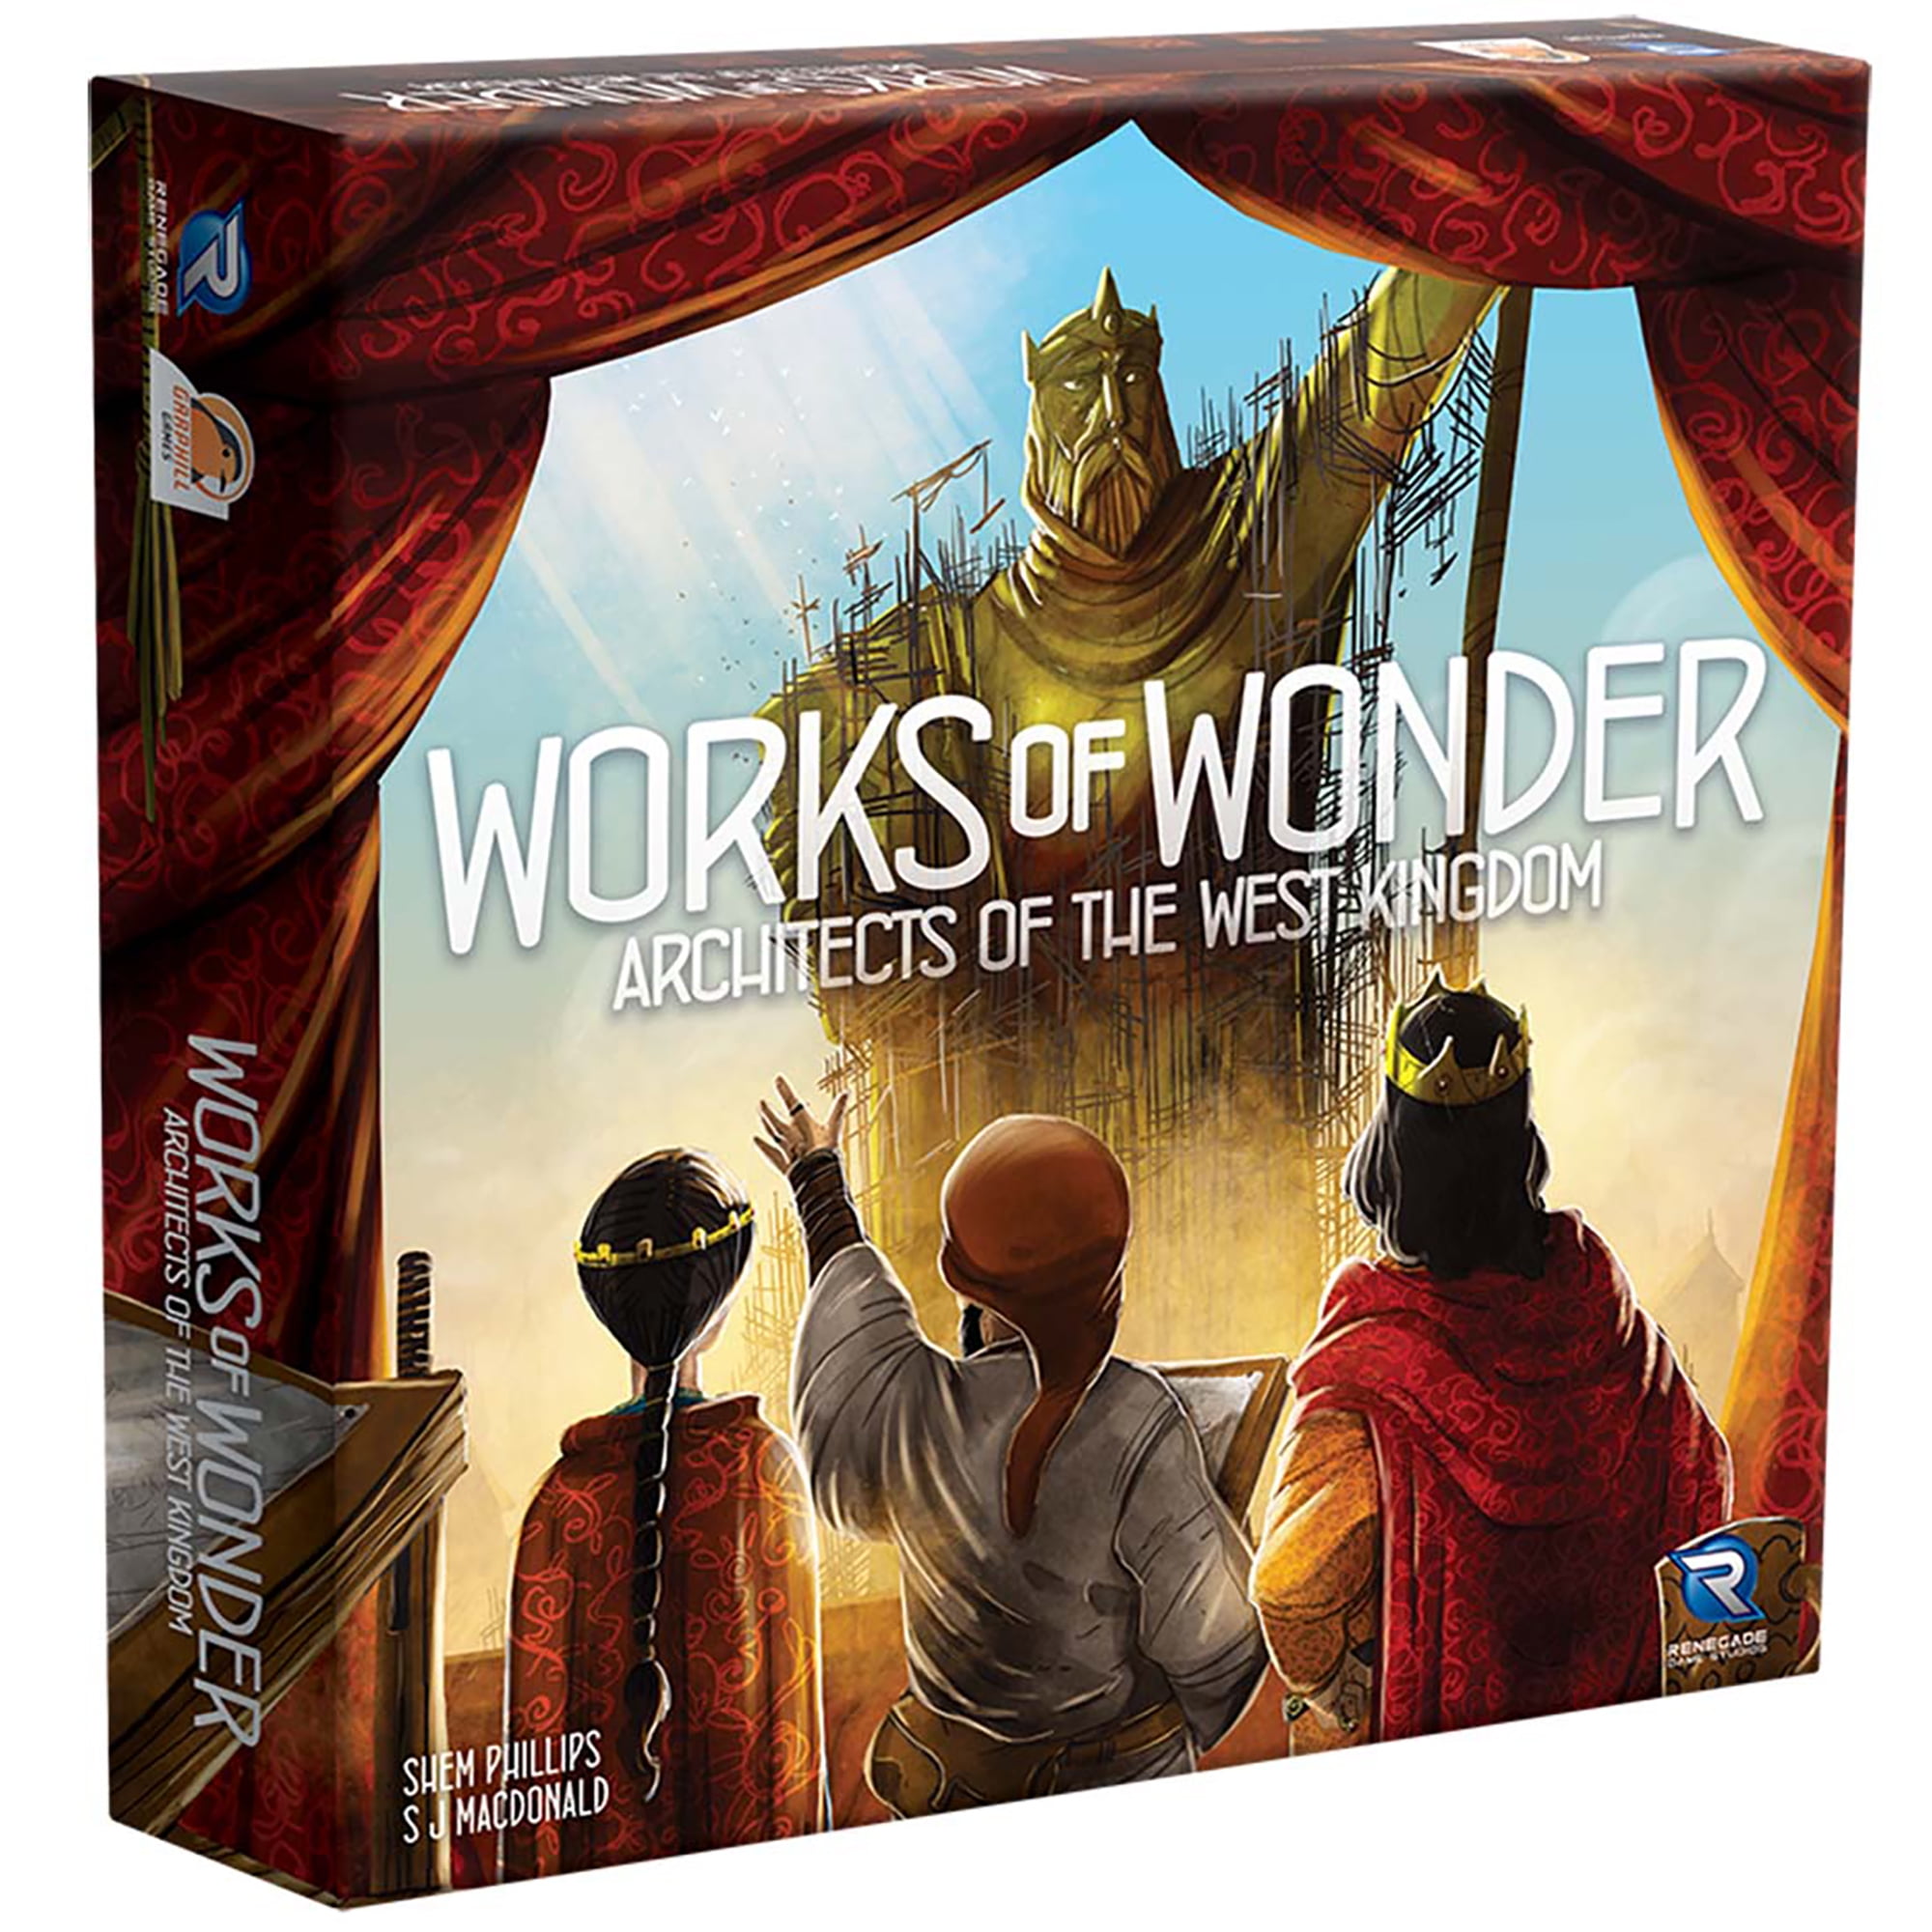 Picture of Renegade Game Studios REN02254 Architects The West Kingdom Works of Wonder Expansion Board Game